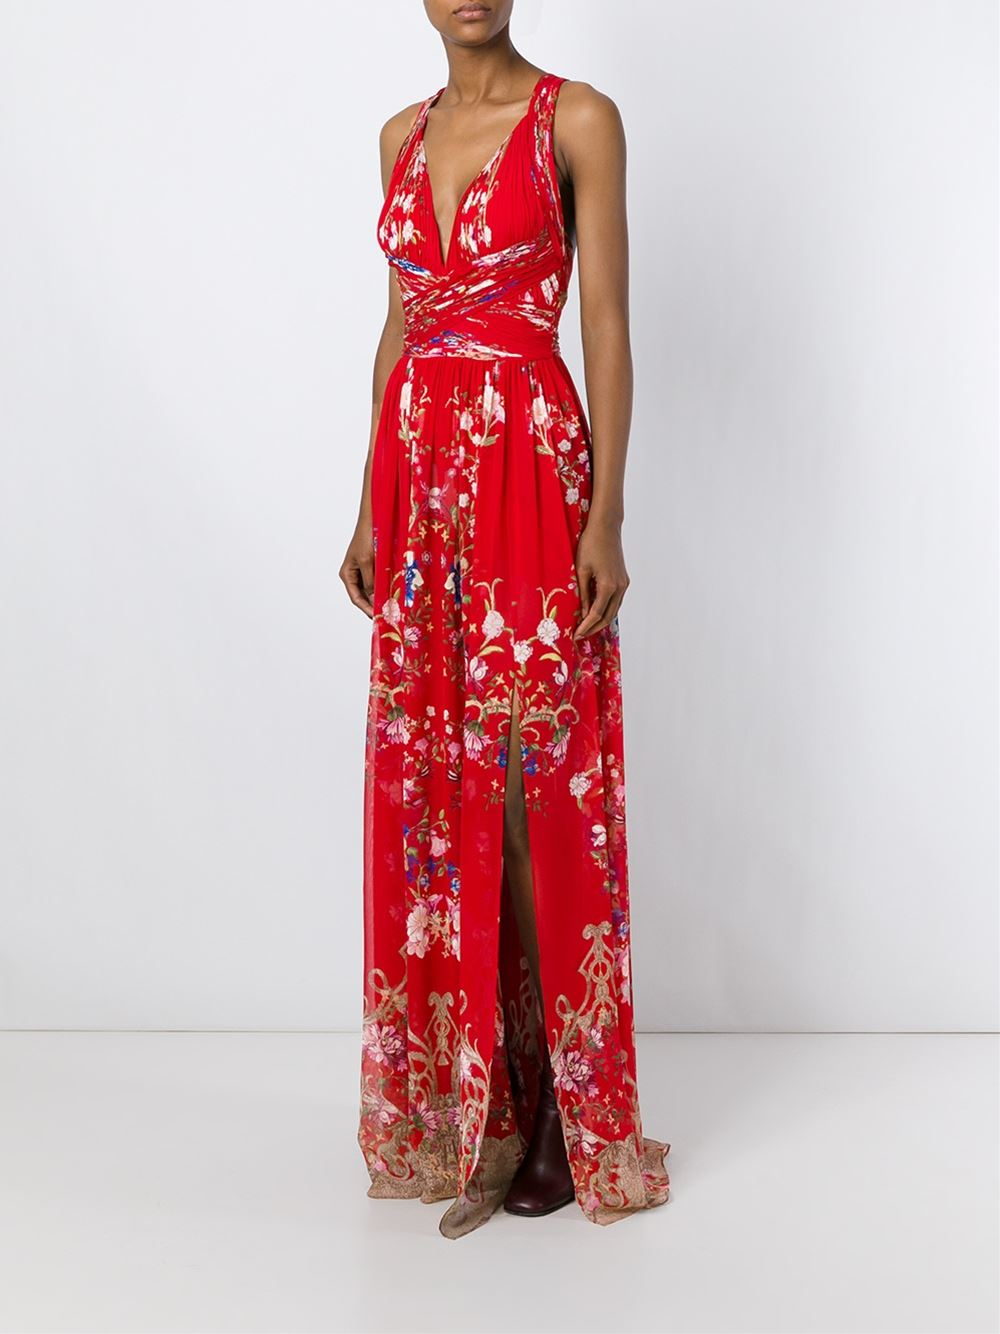 Lyst - Roberto Cavalli Floral Print Long Dress in Red